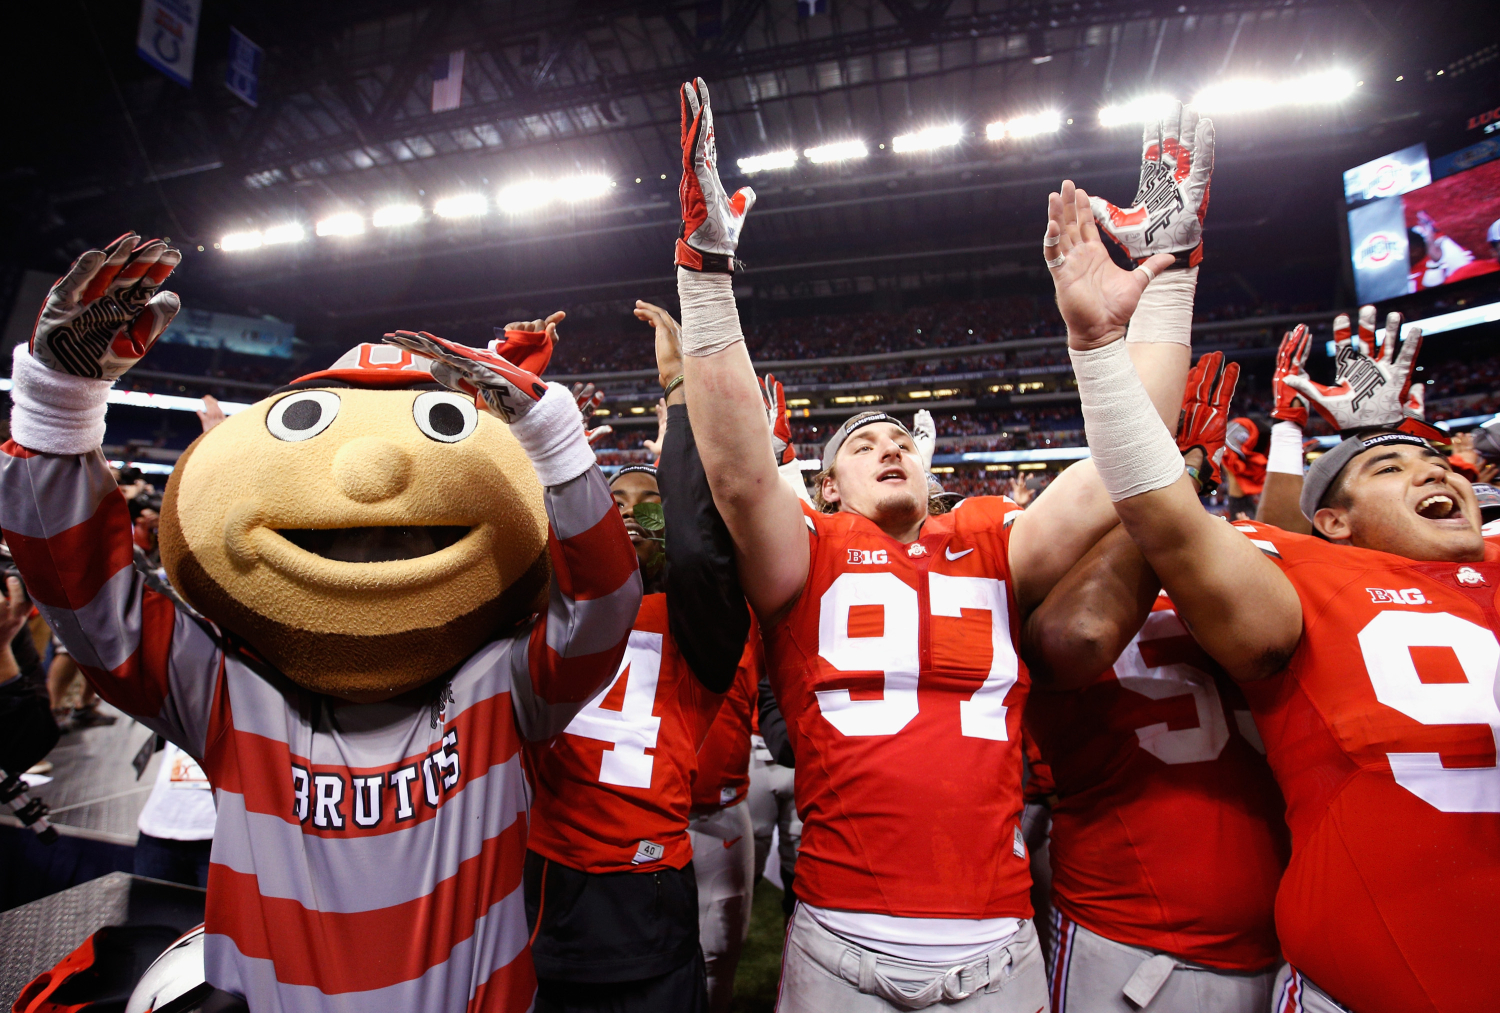 The Ohio State Buckeyes have one of the most dominant college football programs in the country. So, why are they called the Buckeyes?